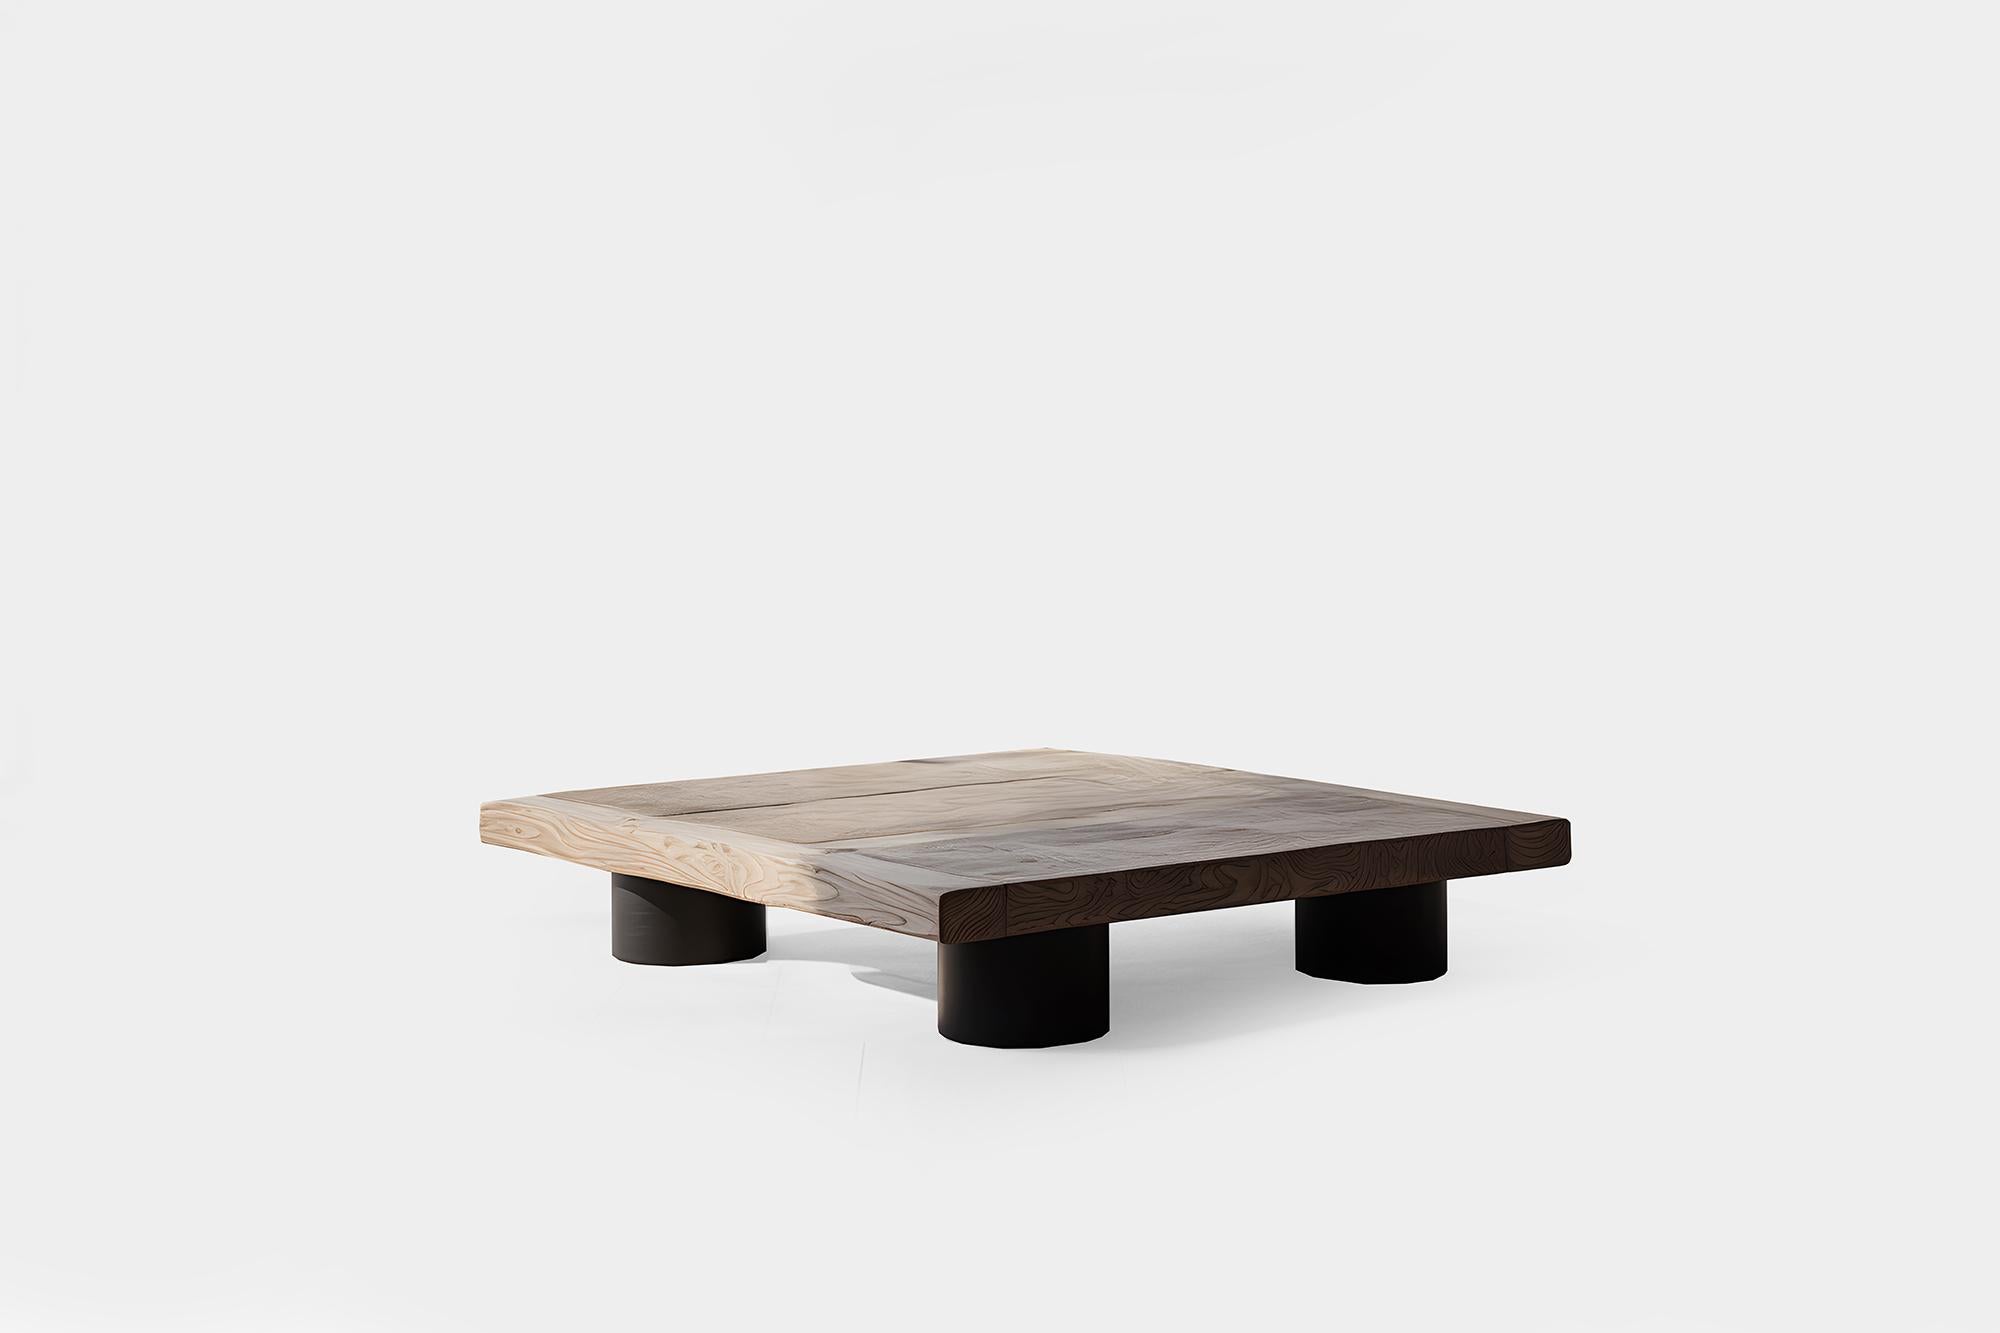 Bold Square Coffee Table in Black Tint - Architectural Fundamenta 29 by NONO

Sculptural coffee table made of solid wood with a natural water-based or black tinted finish. Due to the nature of the production process, each piece may vary in grain,